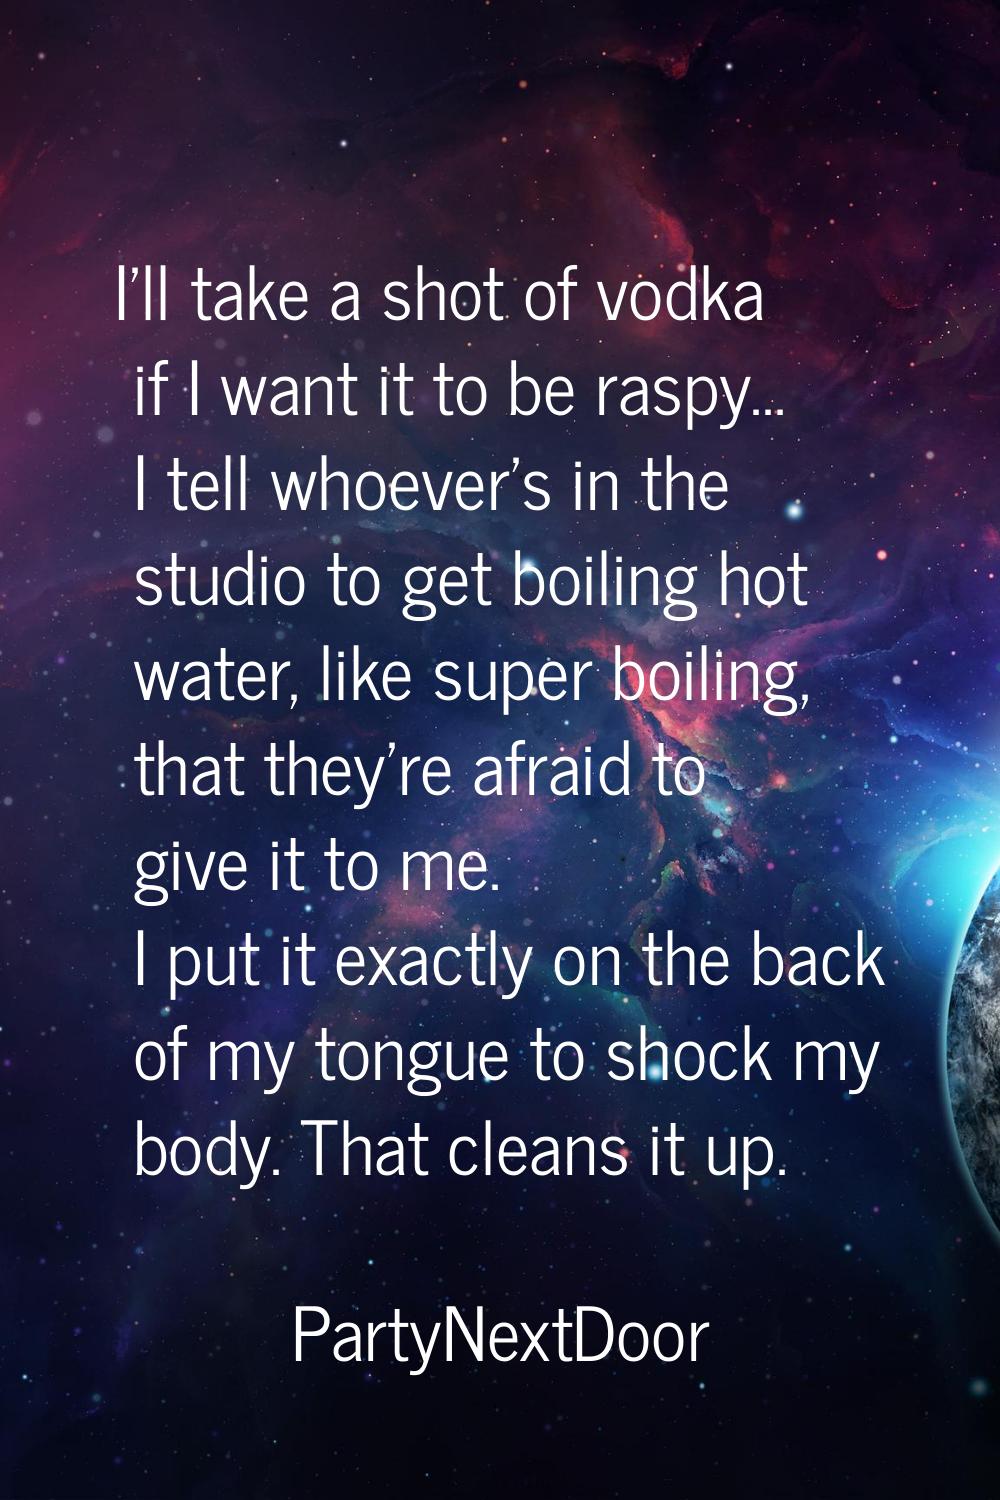 I'll take a shot of vodka if I want it to be raspy... I tell whoever's in the studio to get boiling